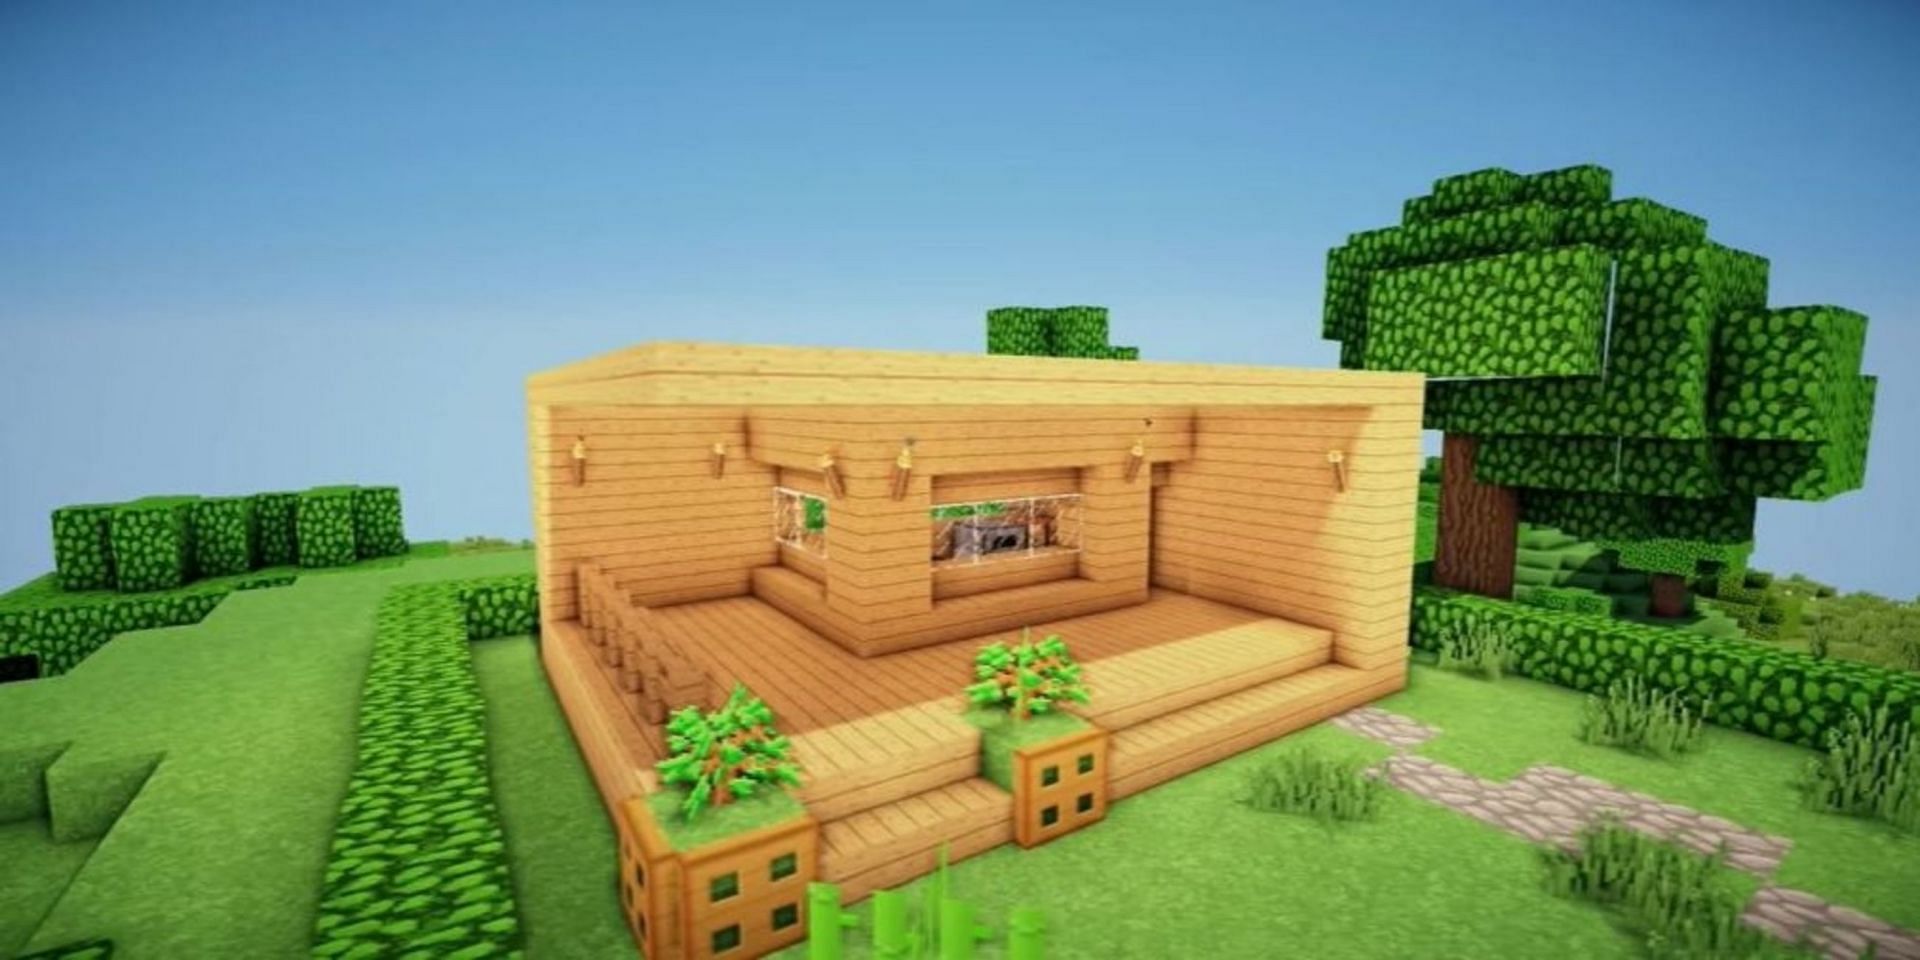 This house is almost entirely built from oak planks, ensuring players have materials available to build it (Image via WiederDude/YouTube)